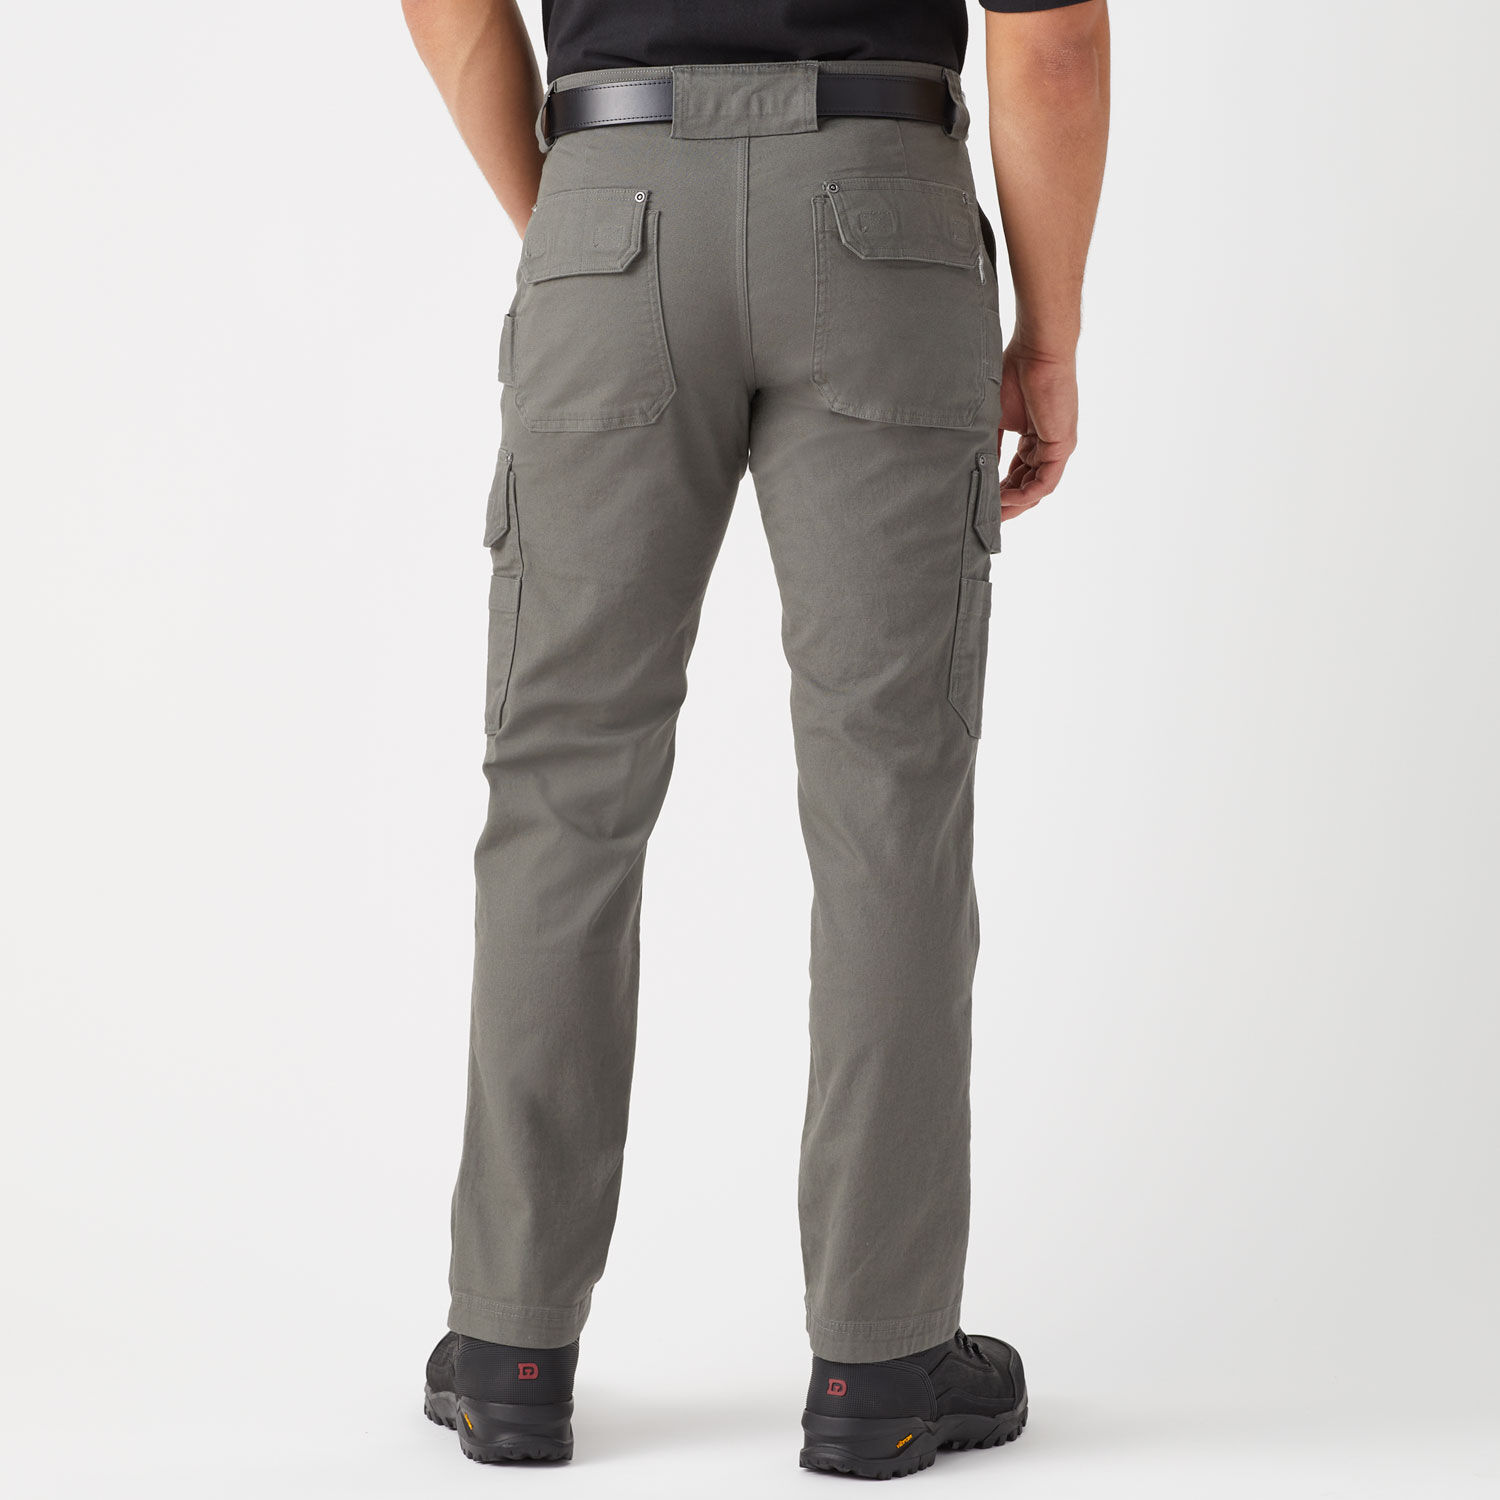 AMERICAN EAGLE MENS CARGO PANTS, Men's Fashion, Activewear on Carousell